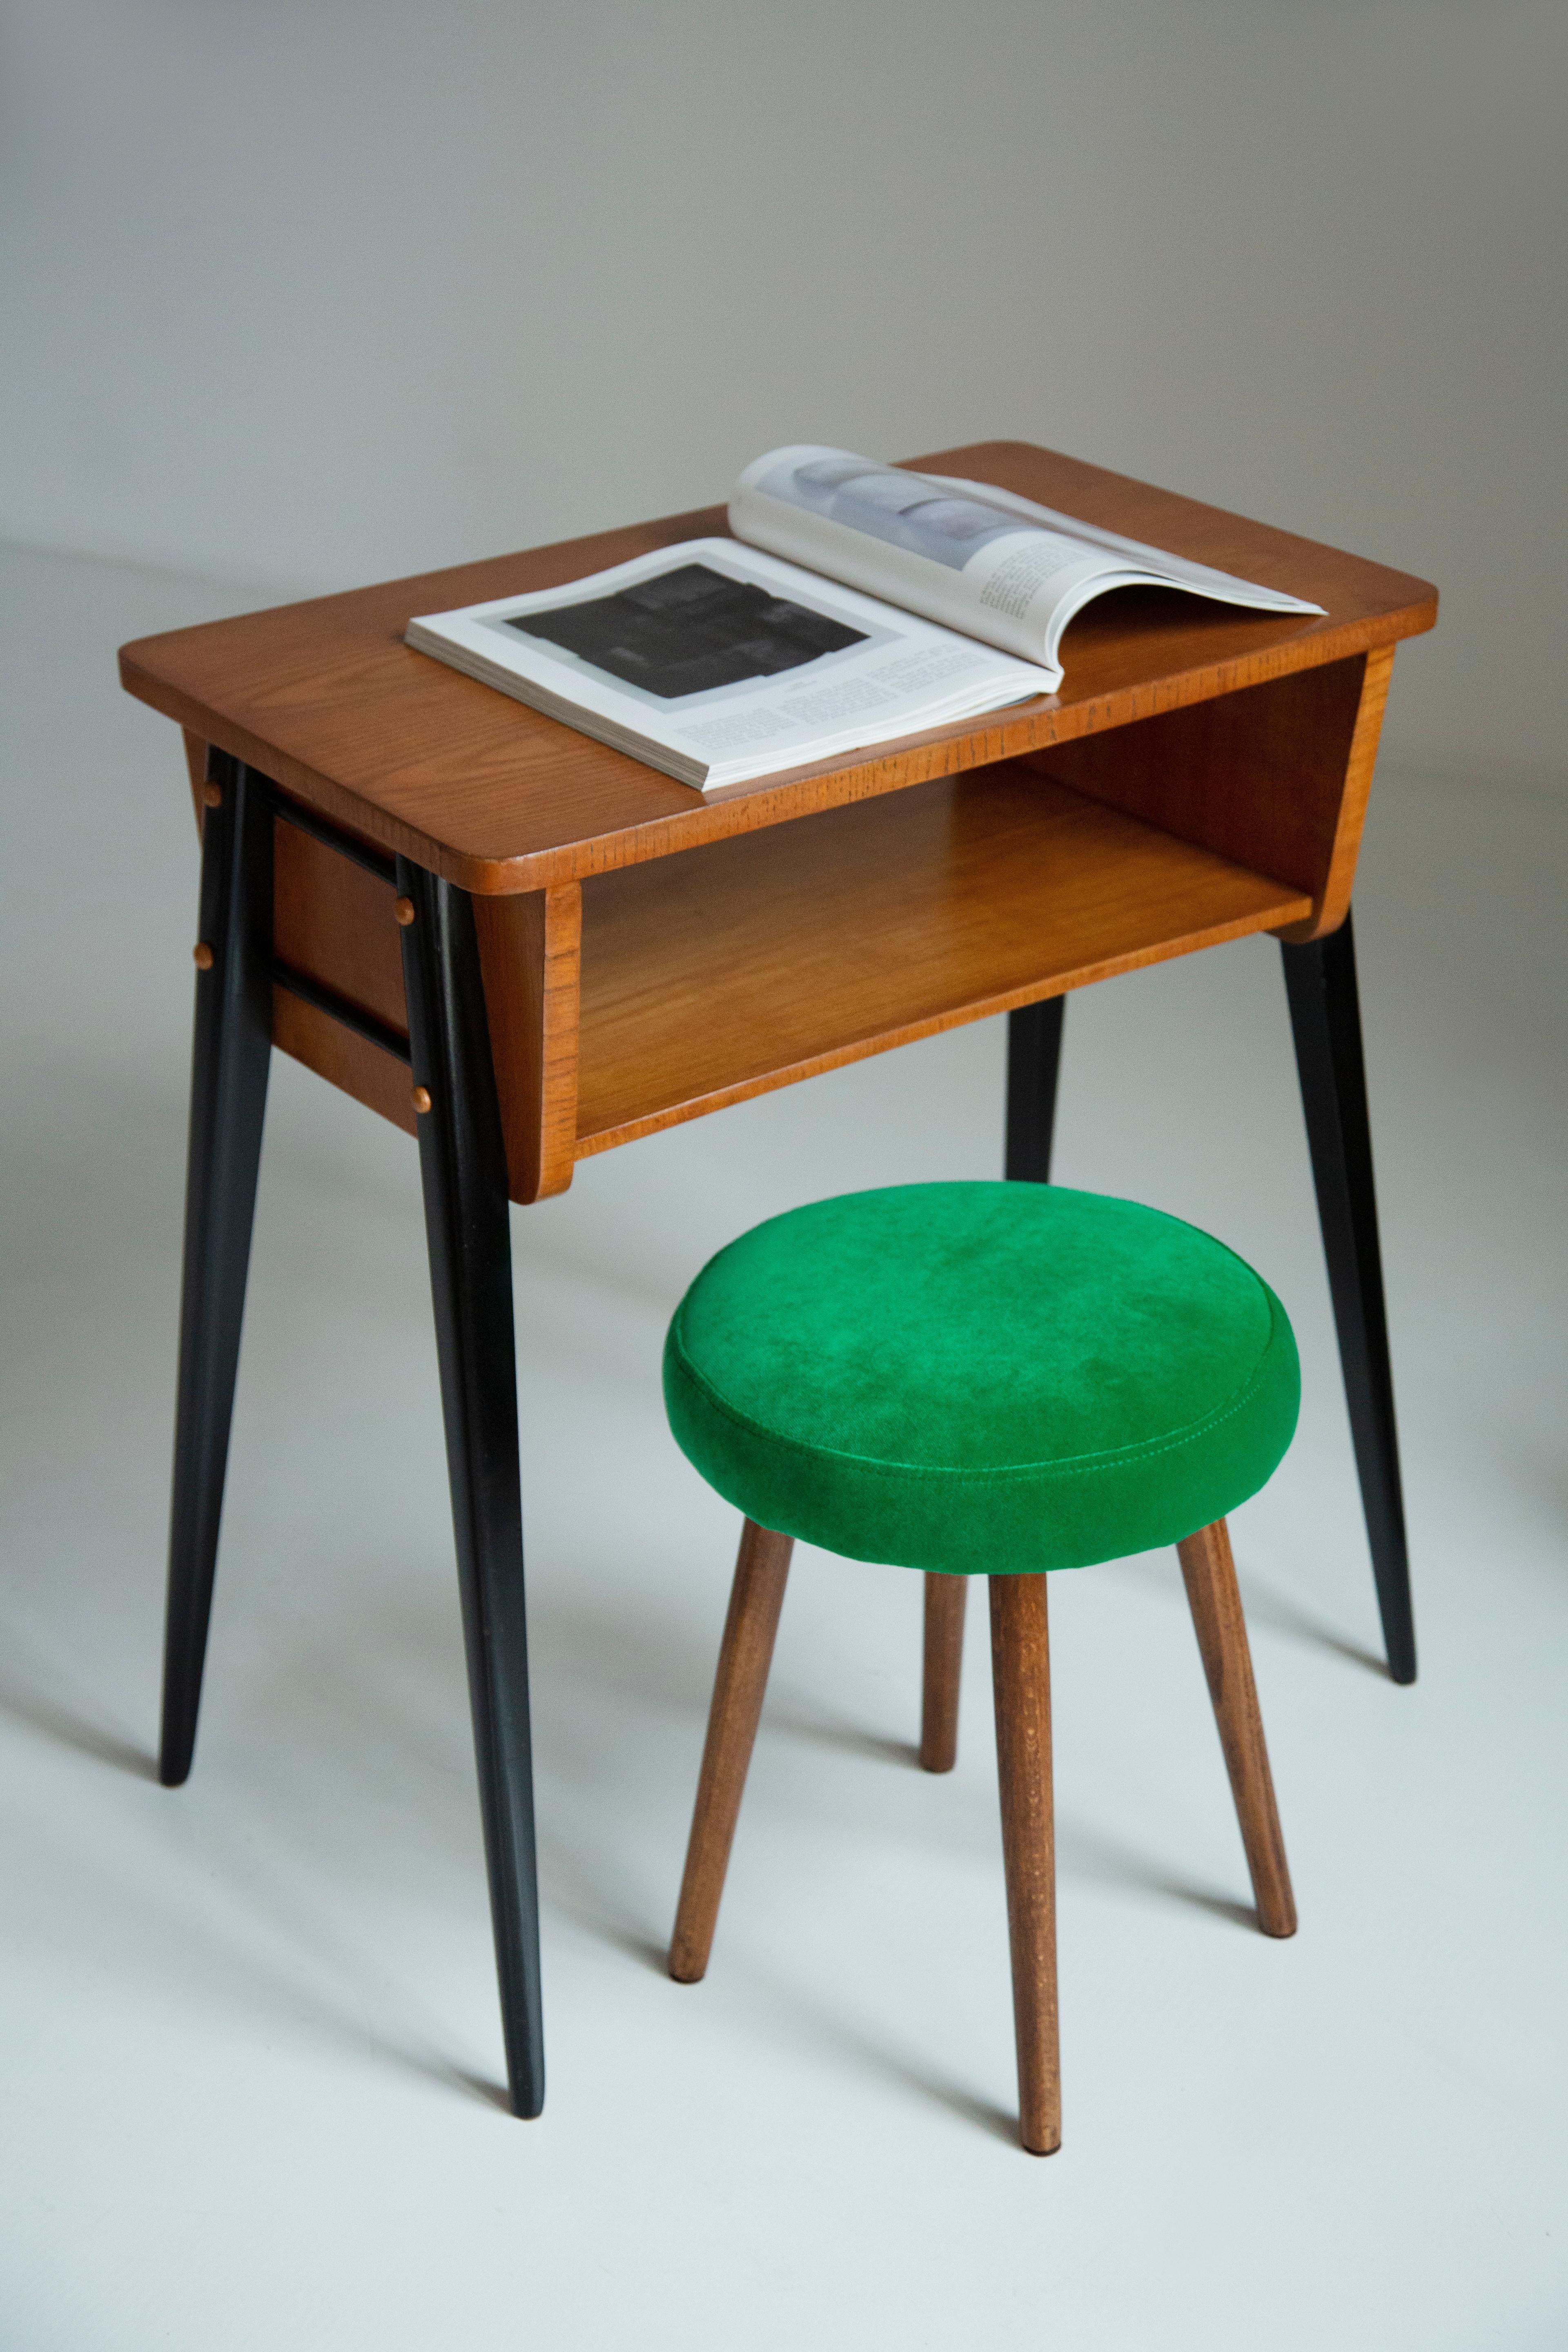 Stool from the turn of the 1960s and 1970s. Beautiful fresh green color velvet upholstery. The stool consists of an upholstered part, a seat and wooden legs narrowing downwards, characteristic of the 1960s style. We can prepare this pair also in